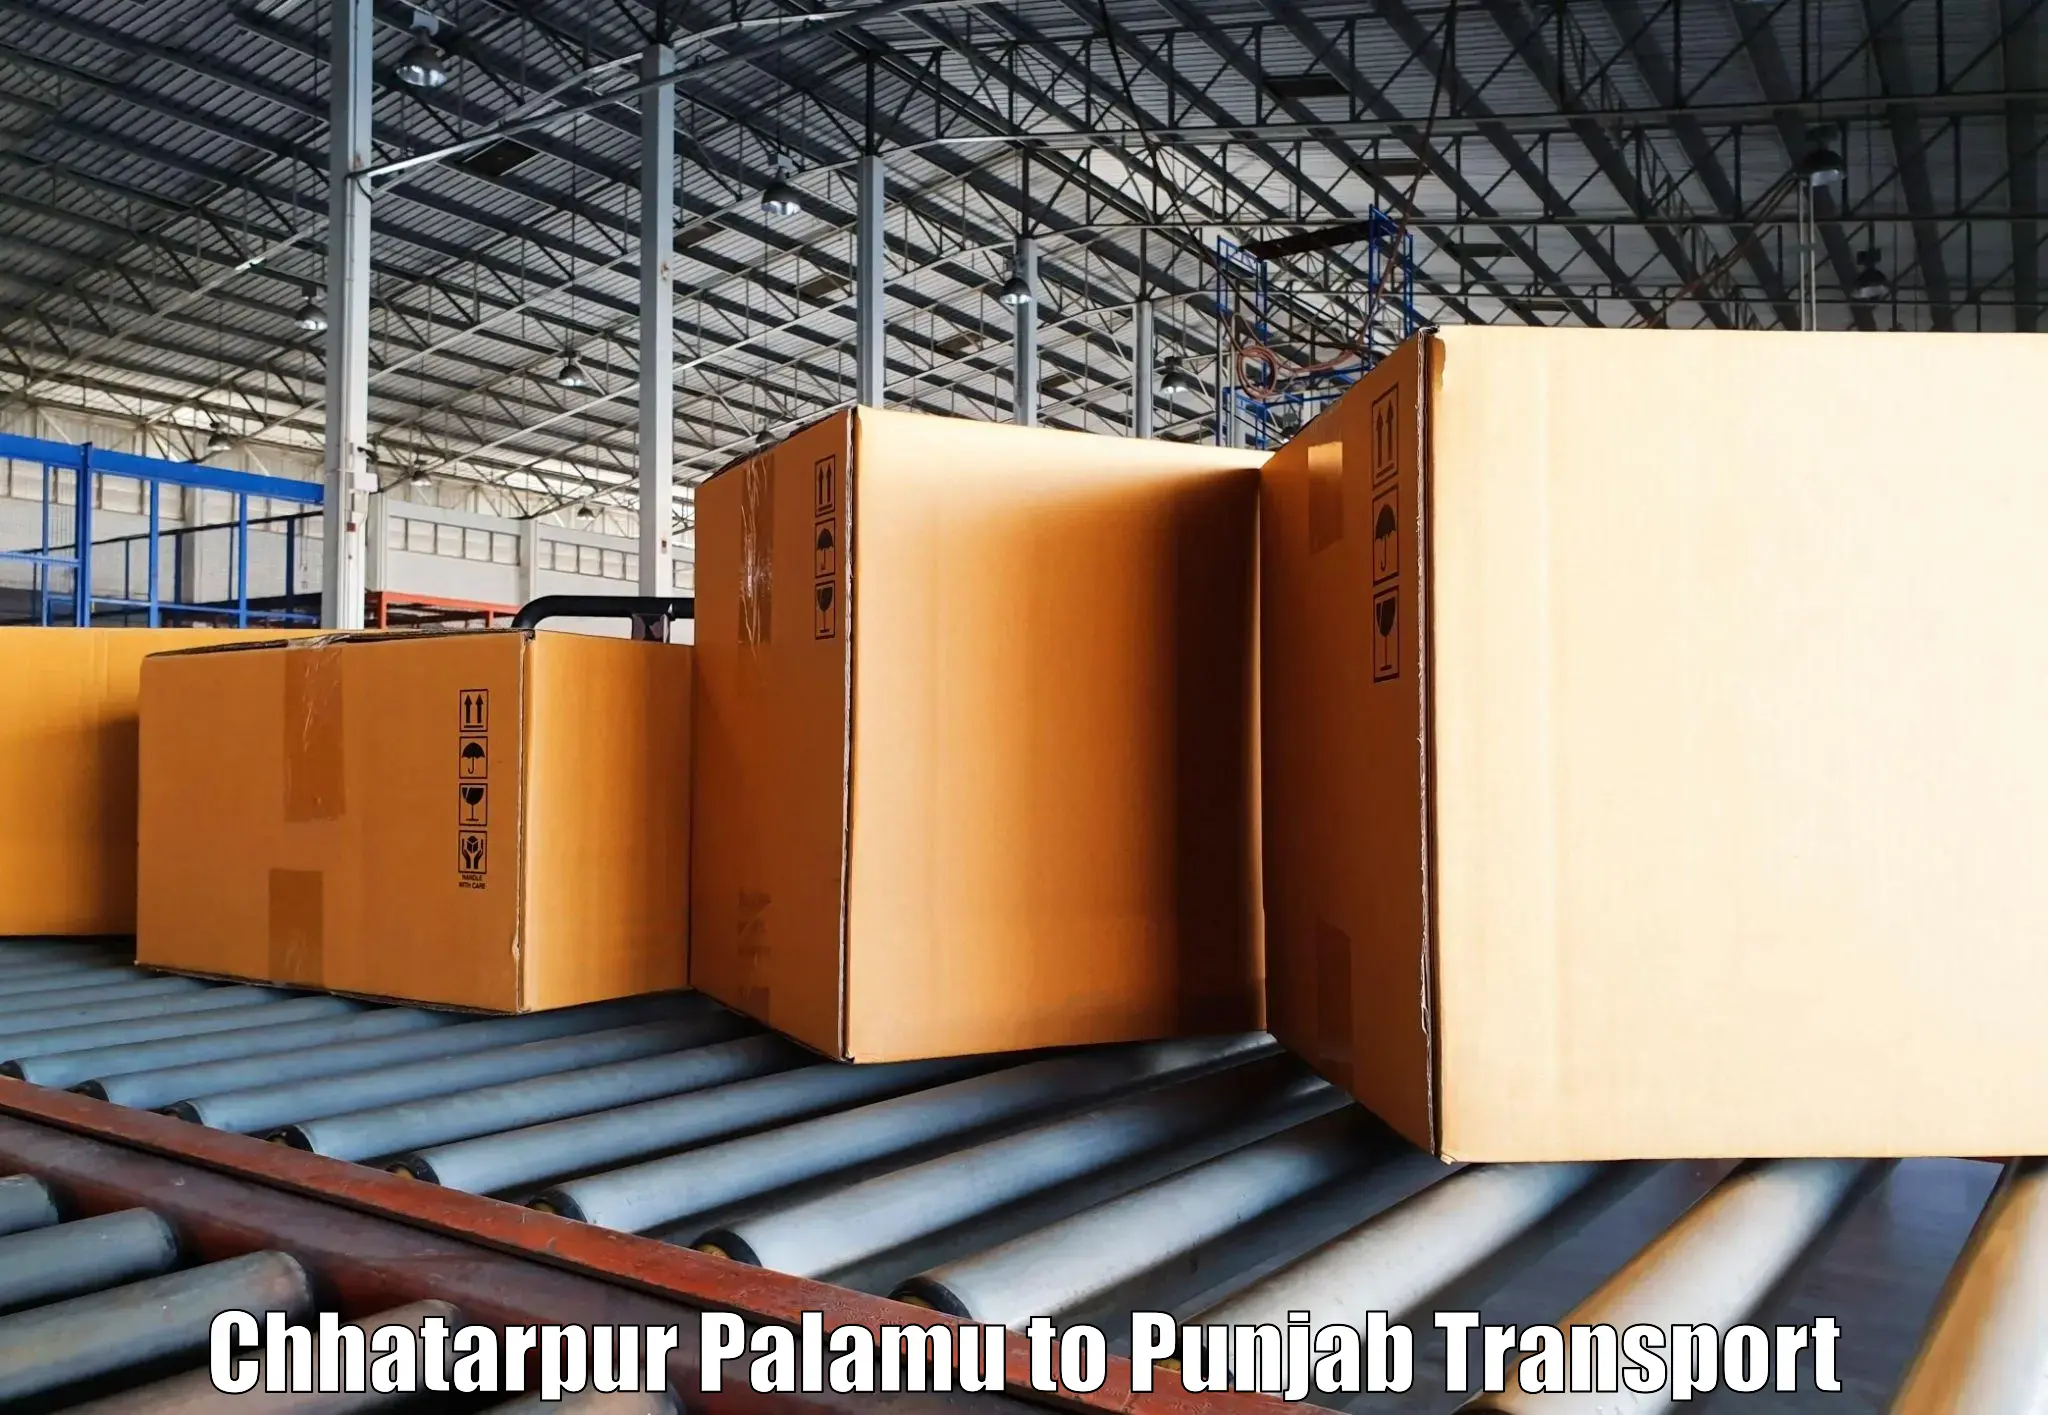 Transport bike from one state to another in Chhatarpur Palamu to Punjab